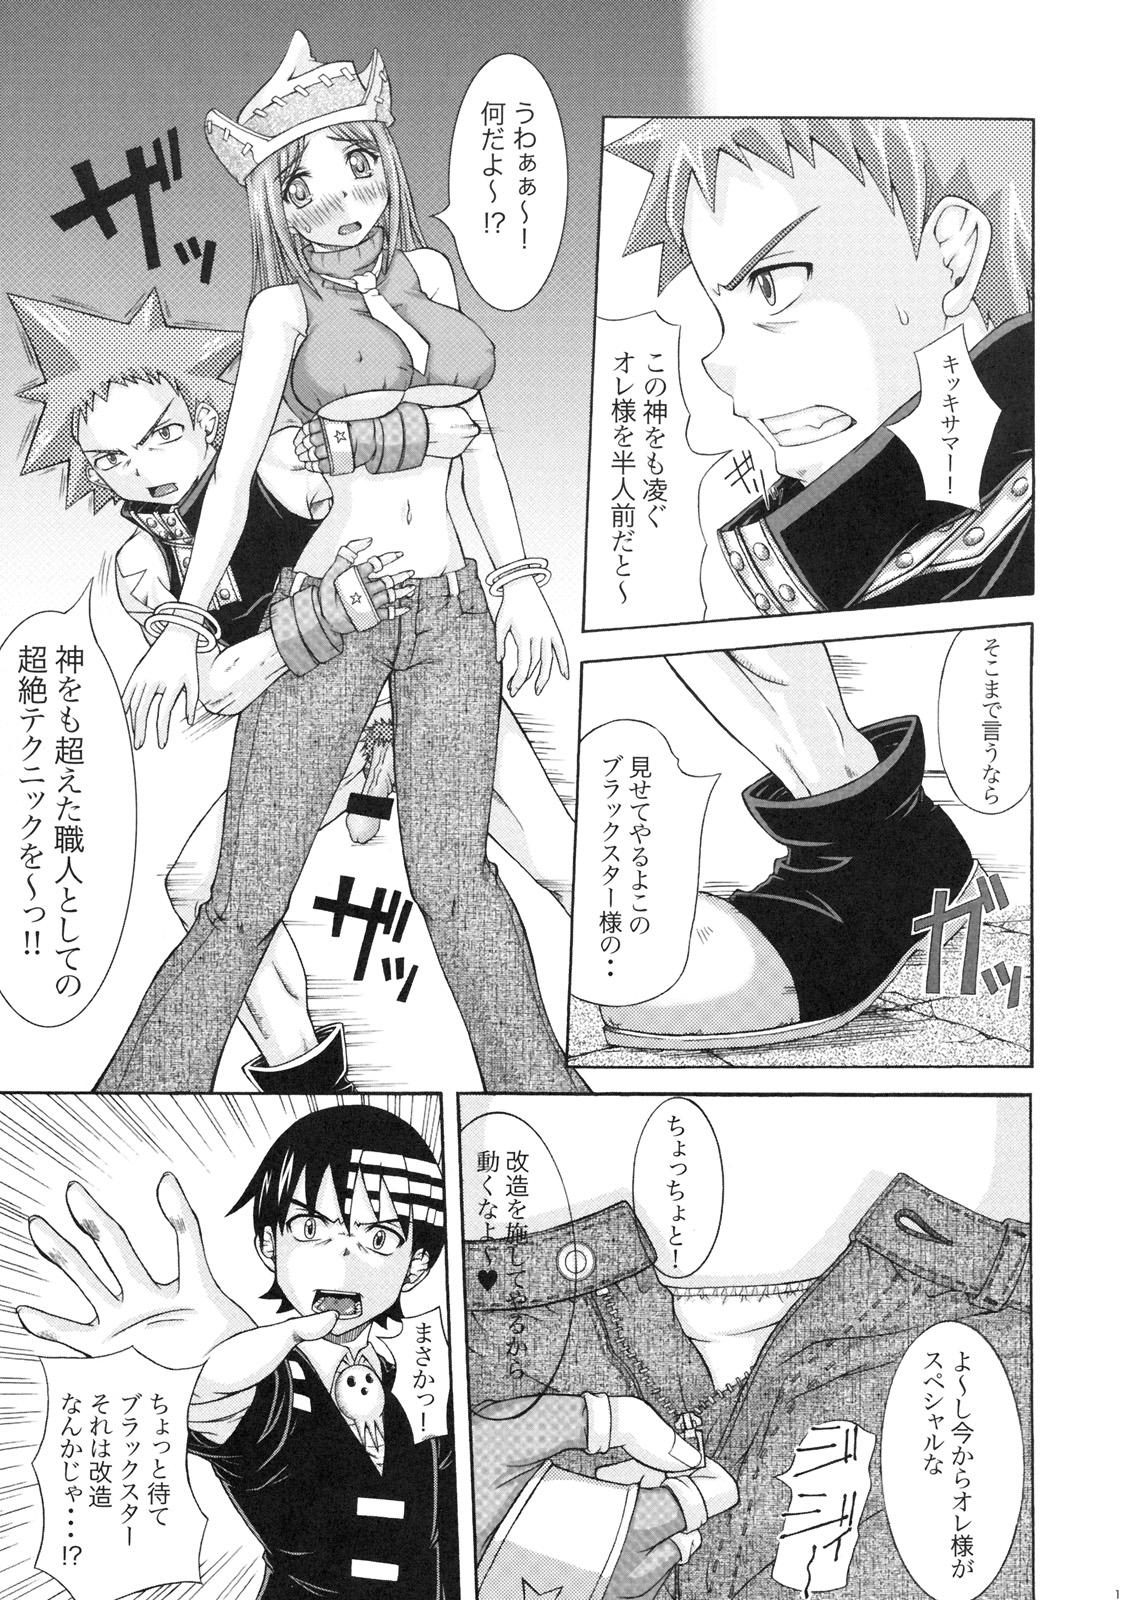 Legs RABI×2 3rd - Queens blade Soul eater Penetration - Page 10